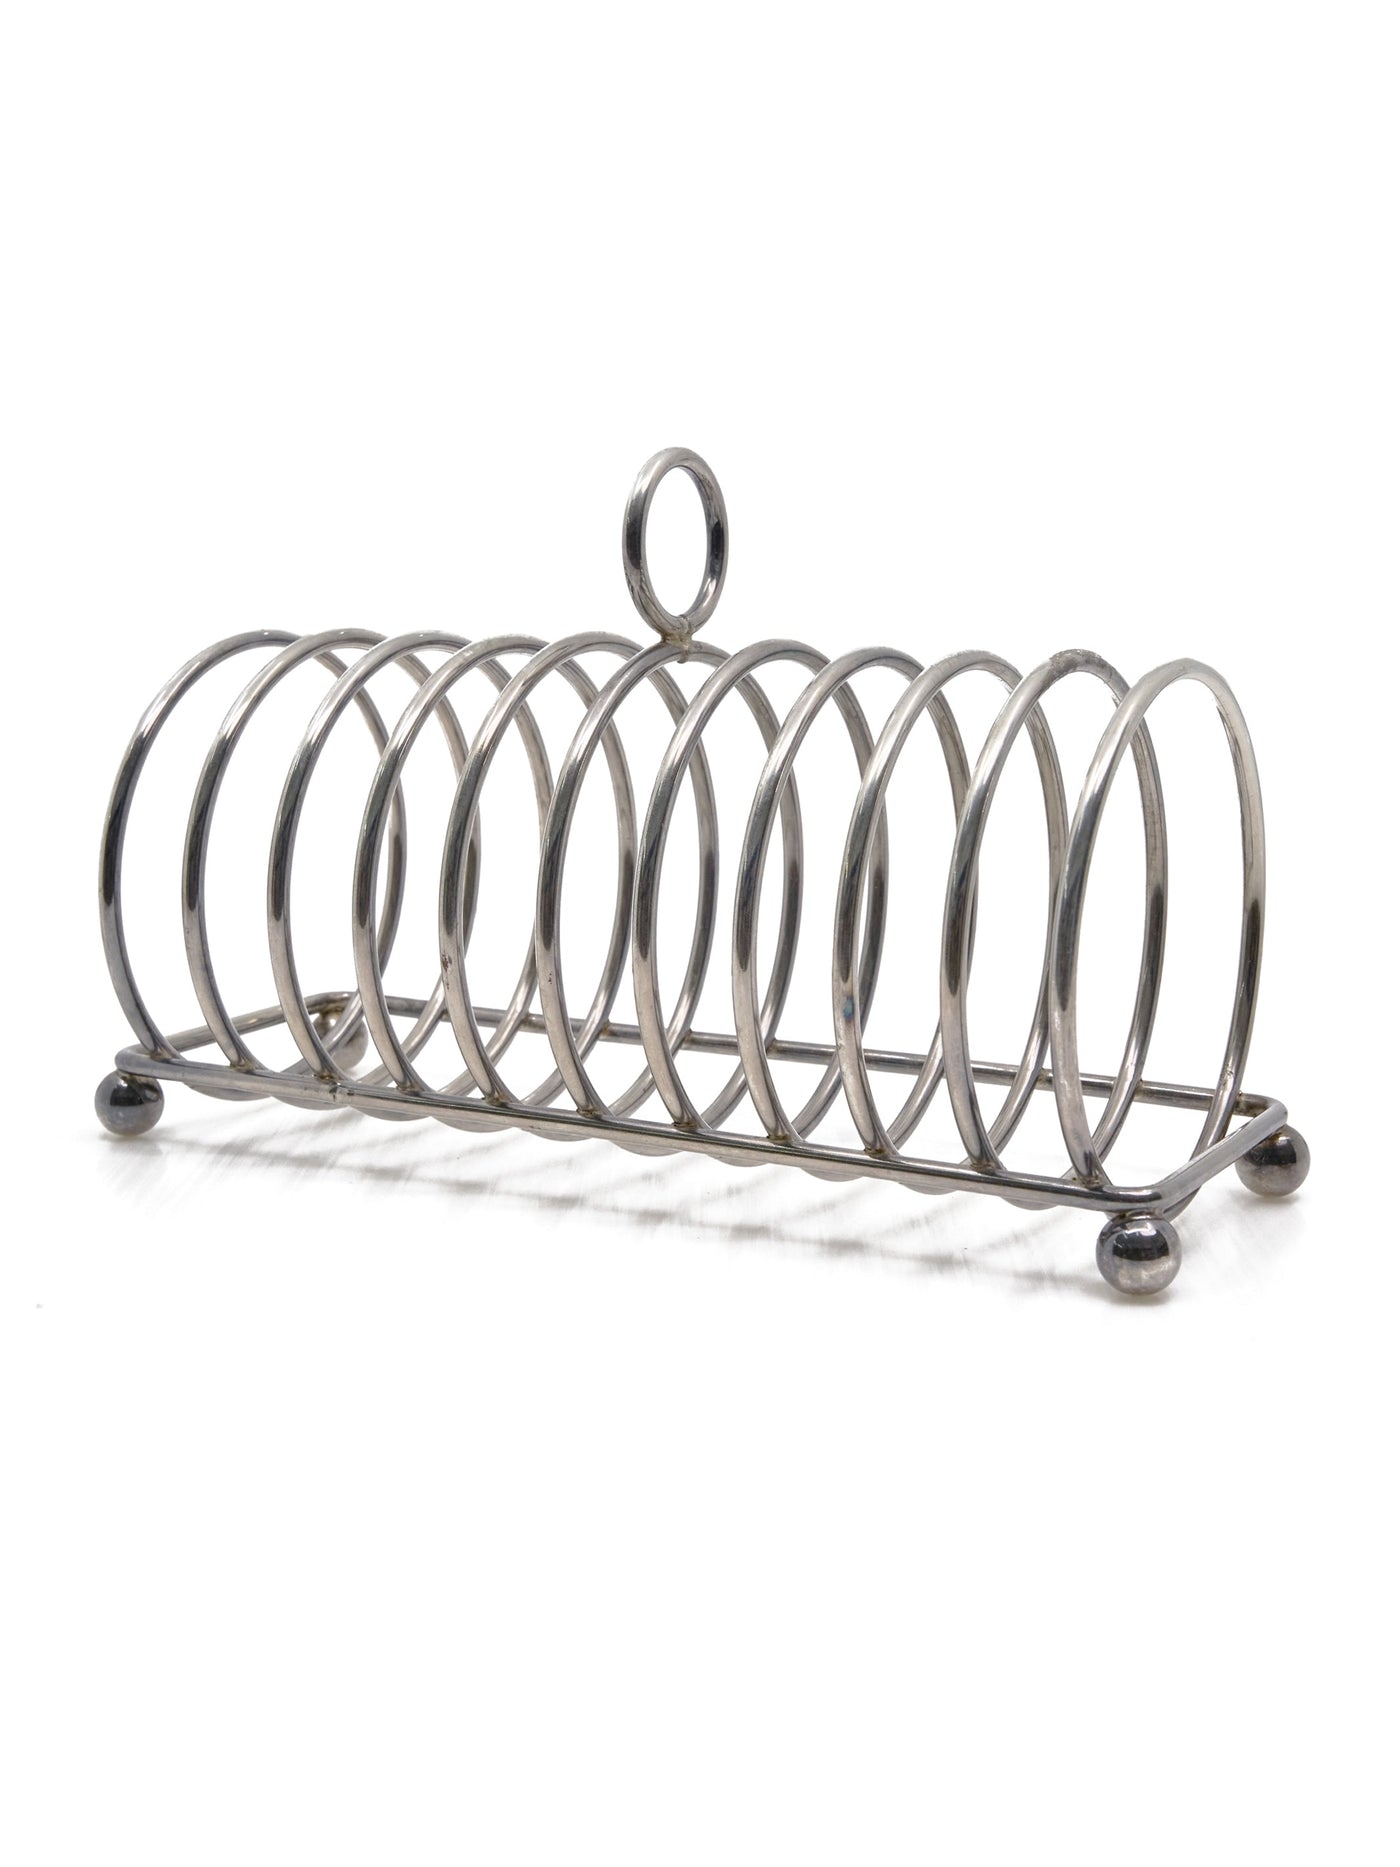 Vintage Round Silver French Toast Rack